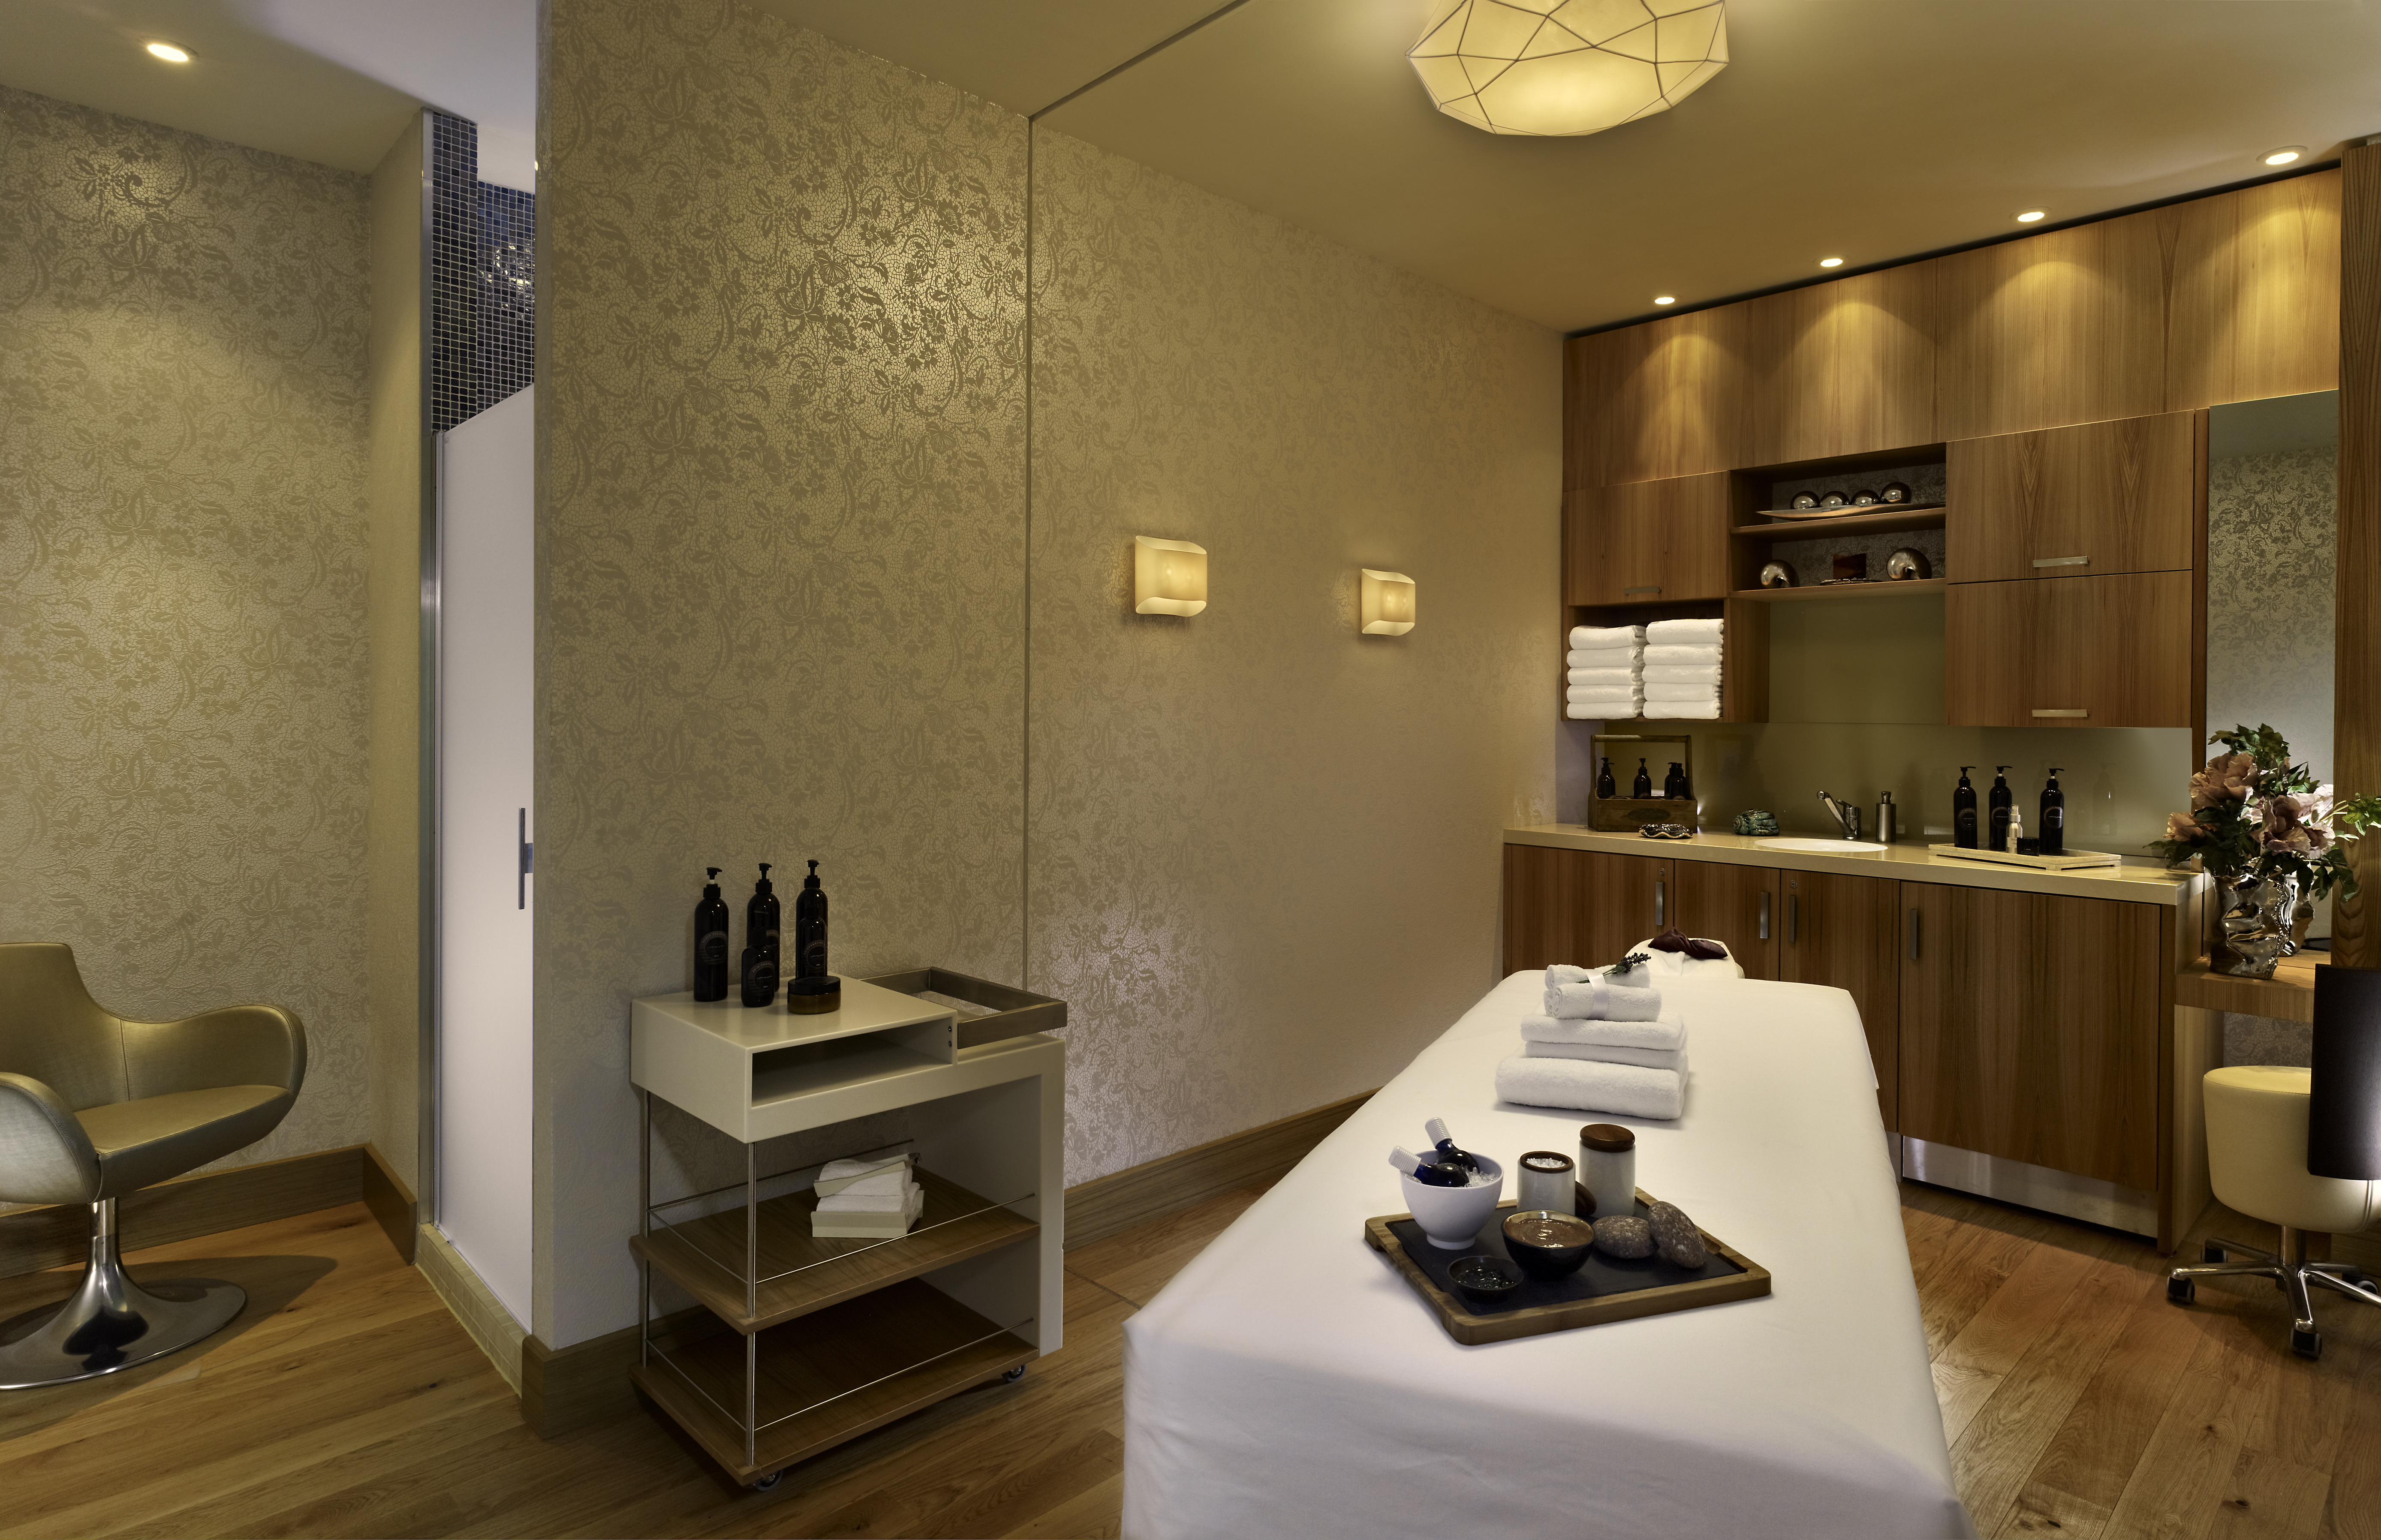 Spa Treatment Room With Chairs, Massage Table, Sinks and Fresh Towels in Wood Cabinet